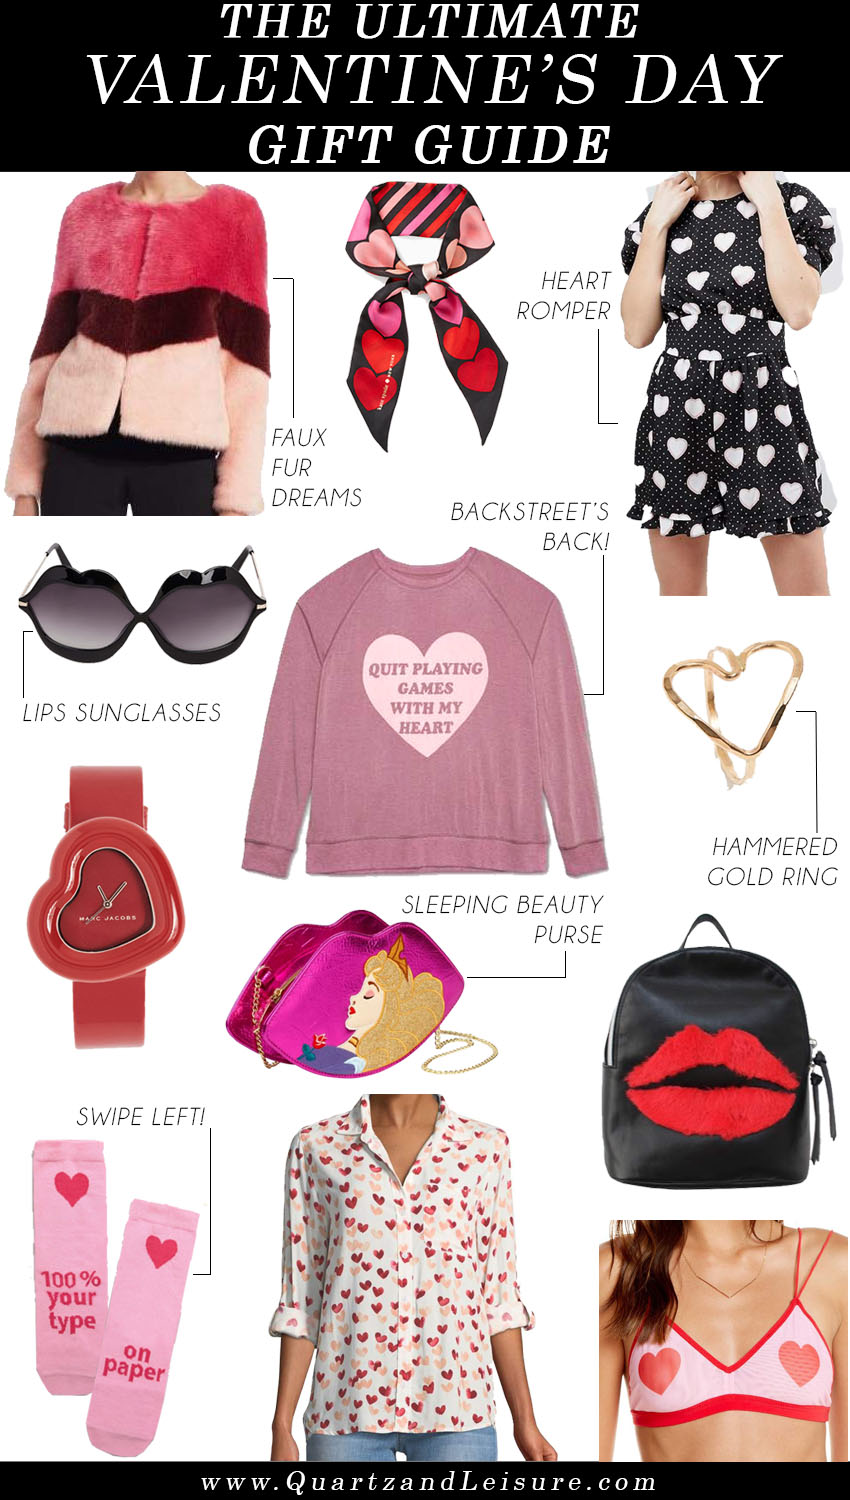 Valentine's Day Gift Guide, Valentine's Gifts for her